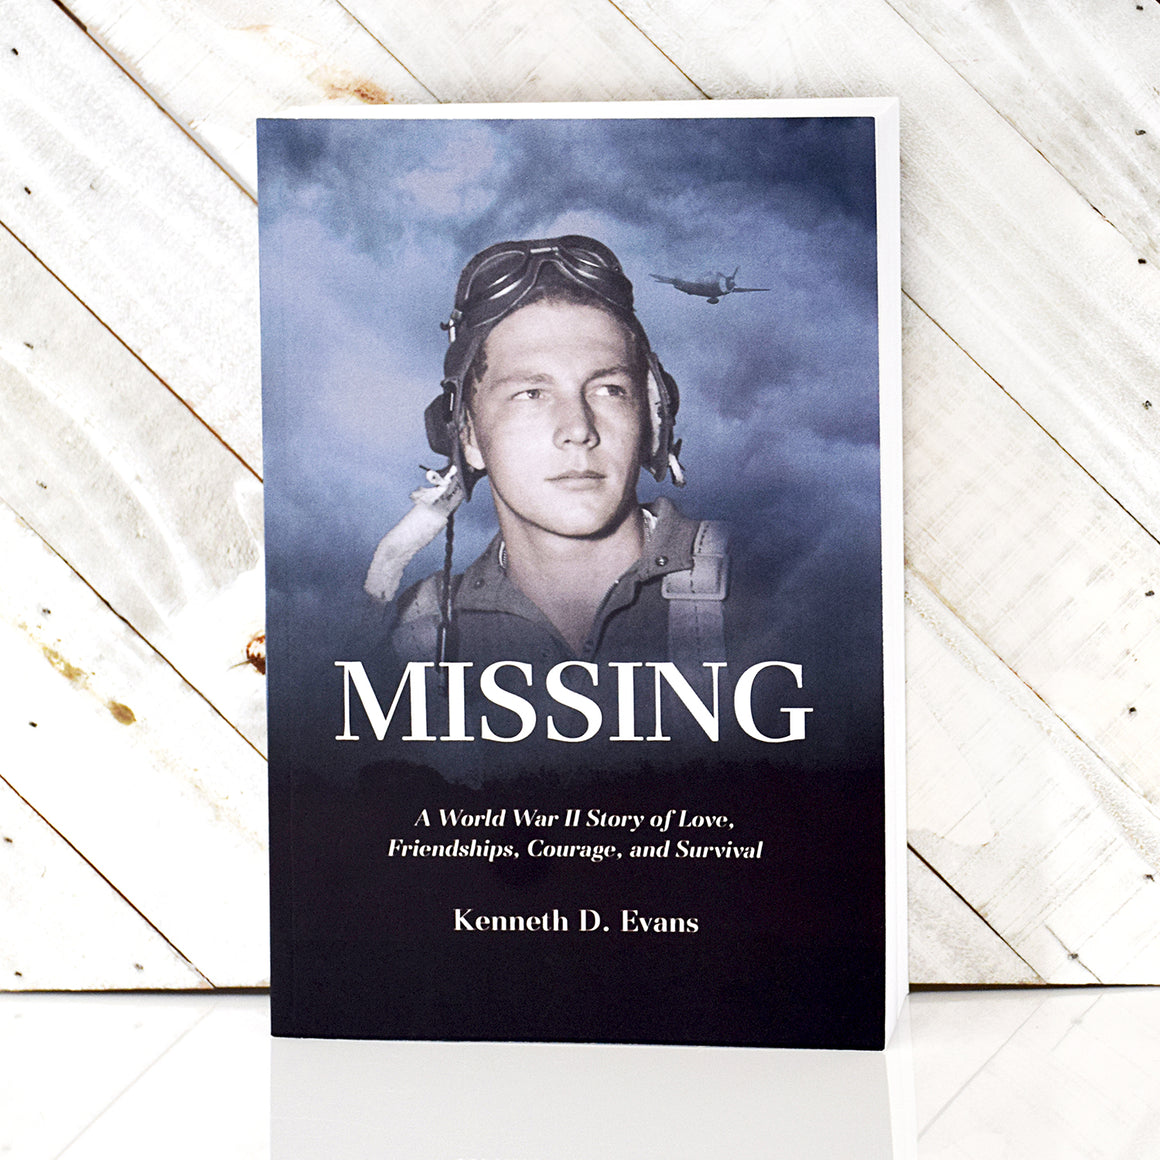 Missing - A World War II Story of Love, Friendship, Courage and Survival - Soft Cover